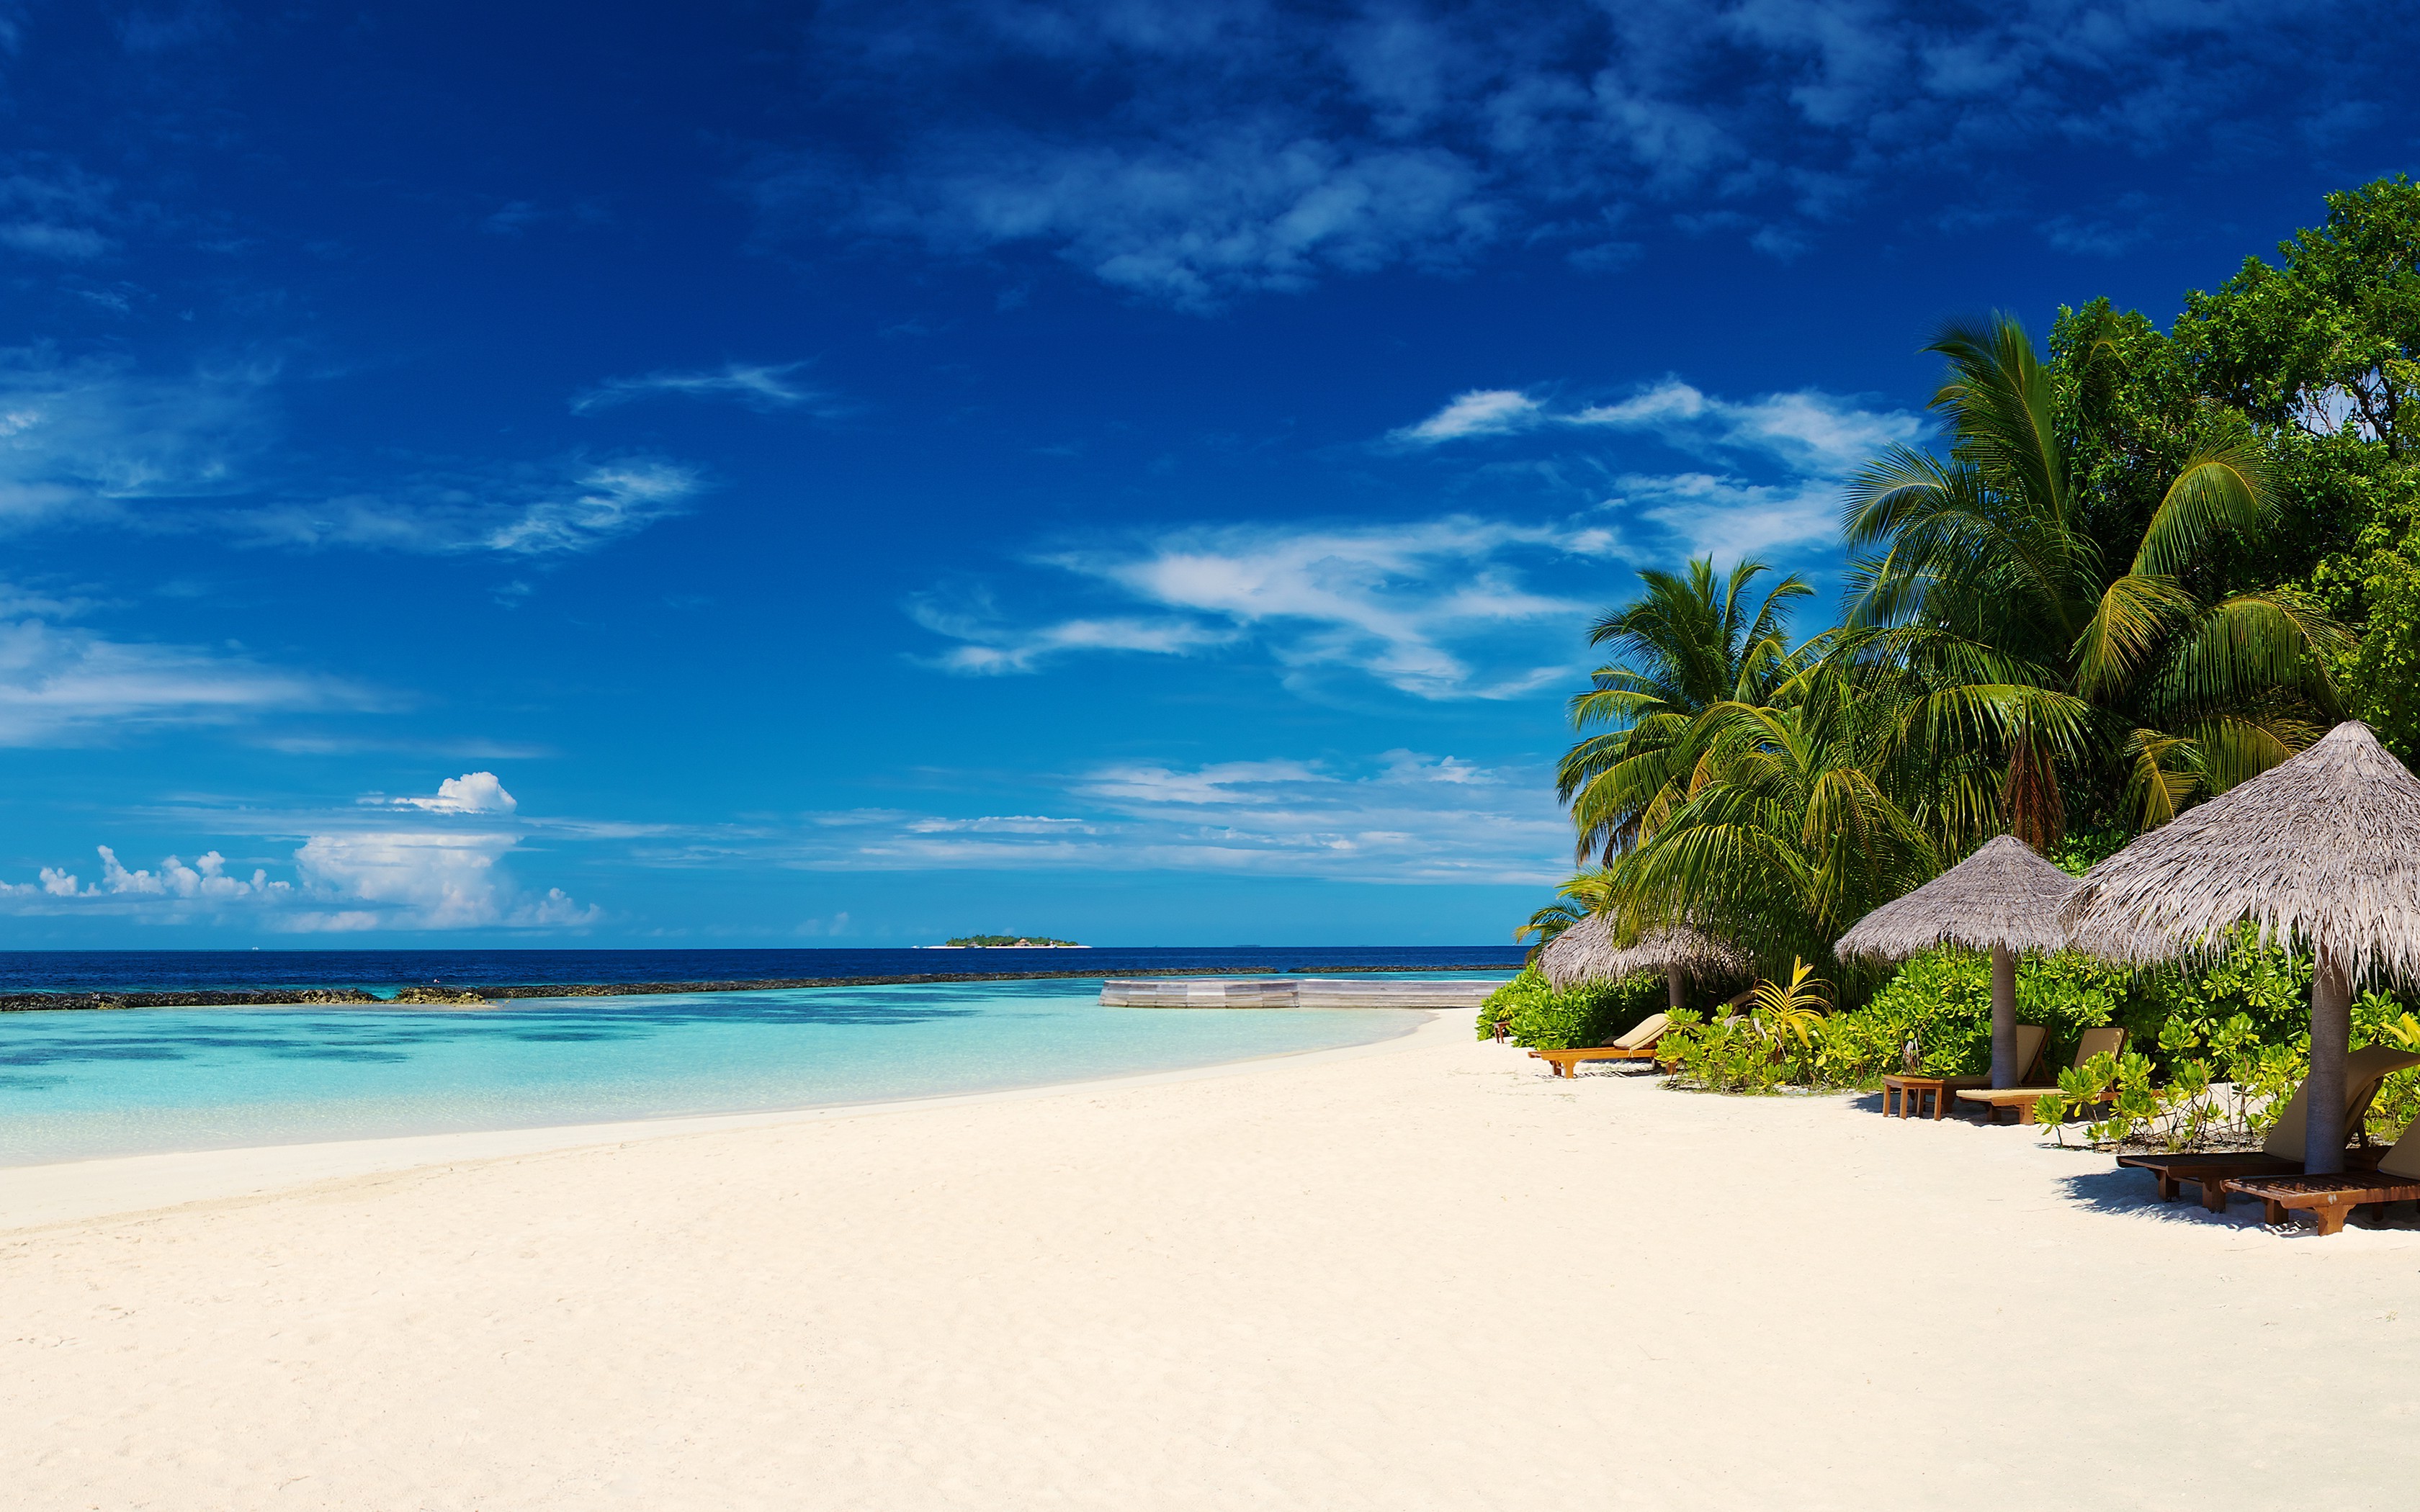 Beach In The Maldives HD Wallpaper Background Image